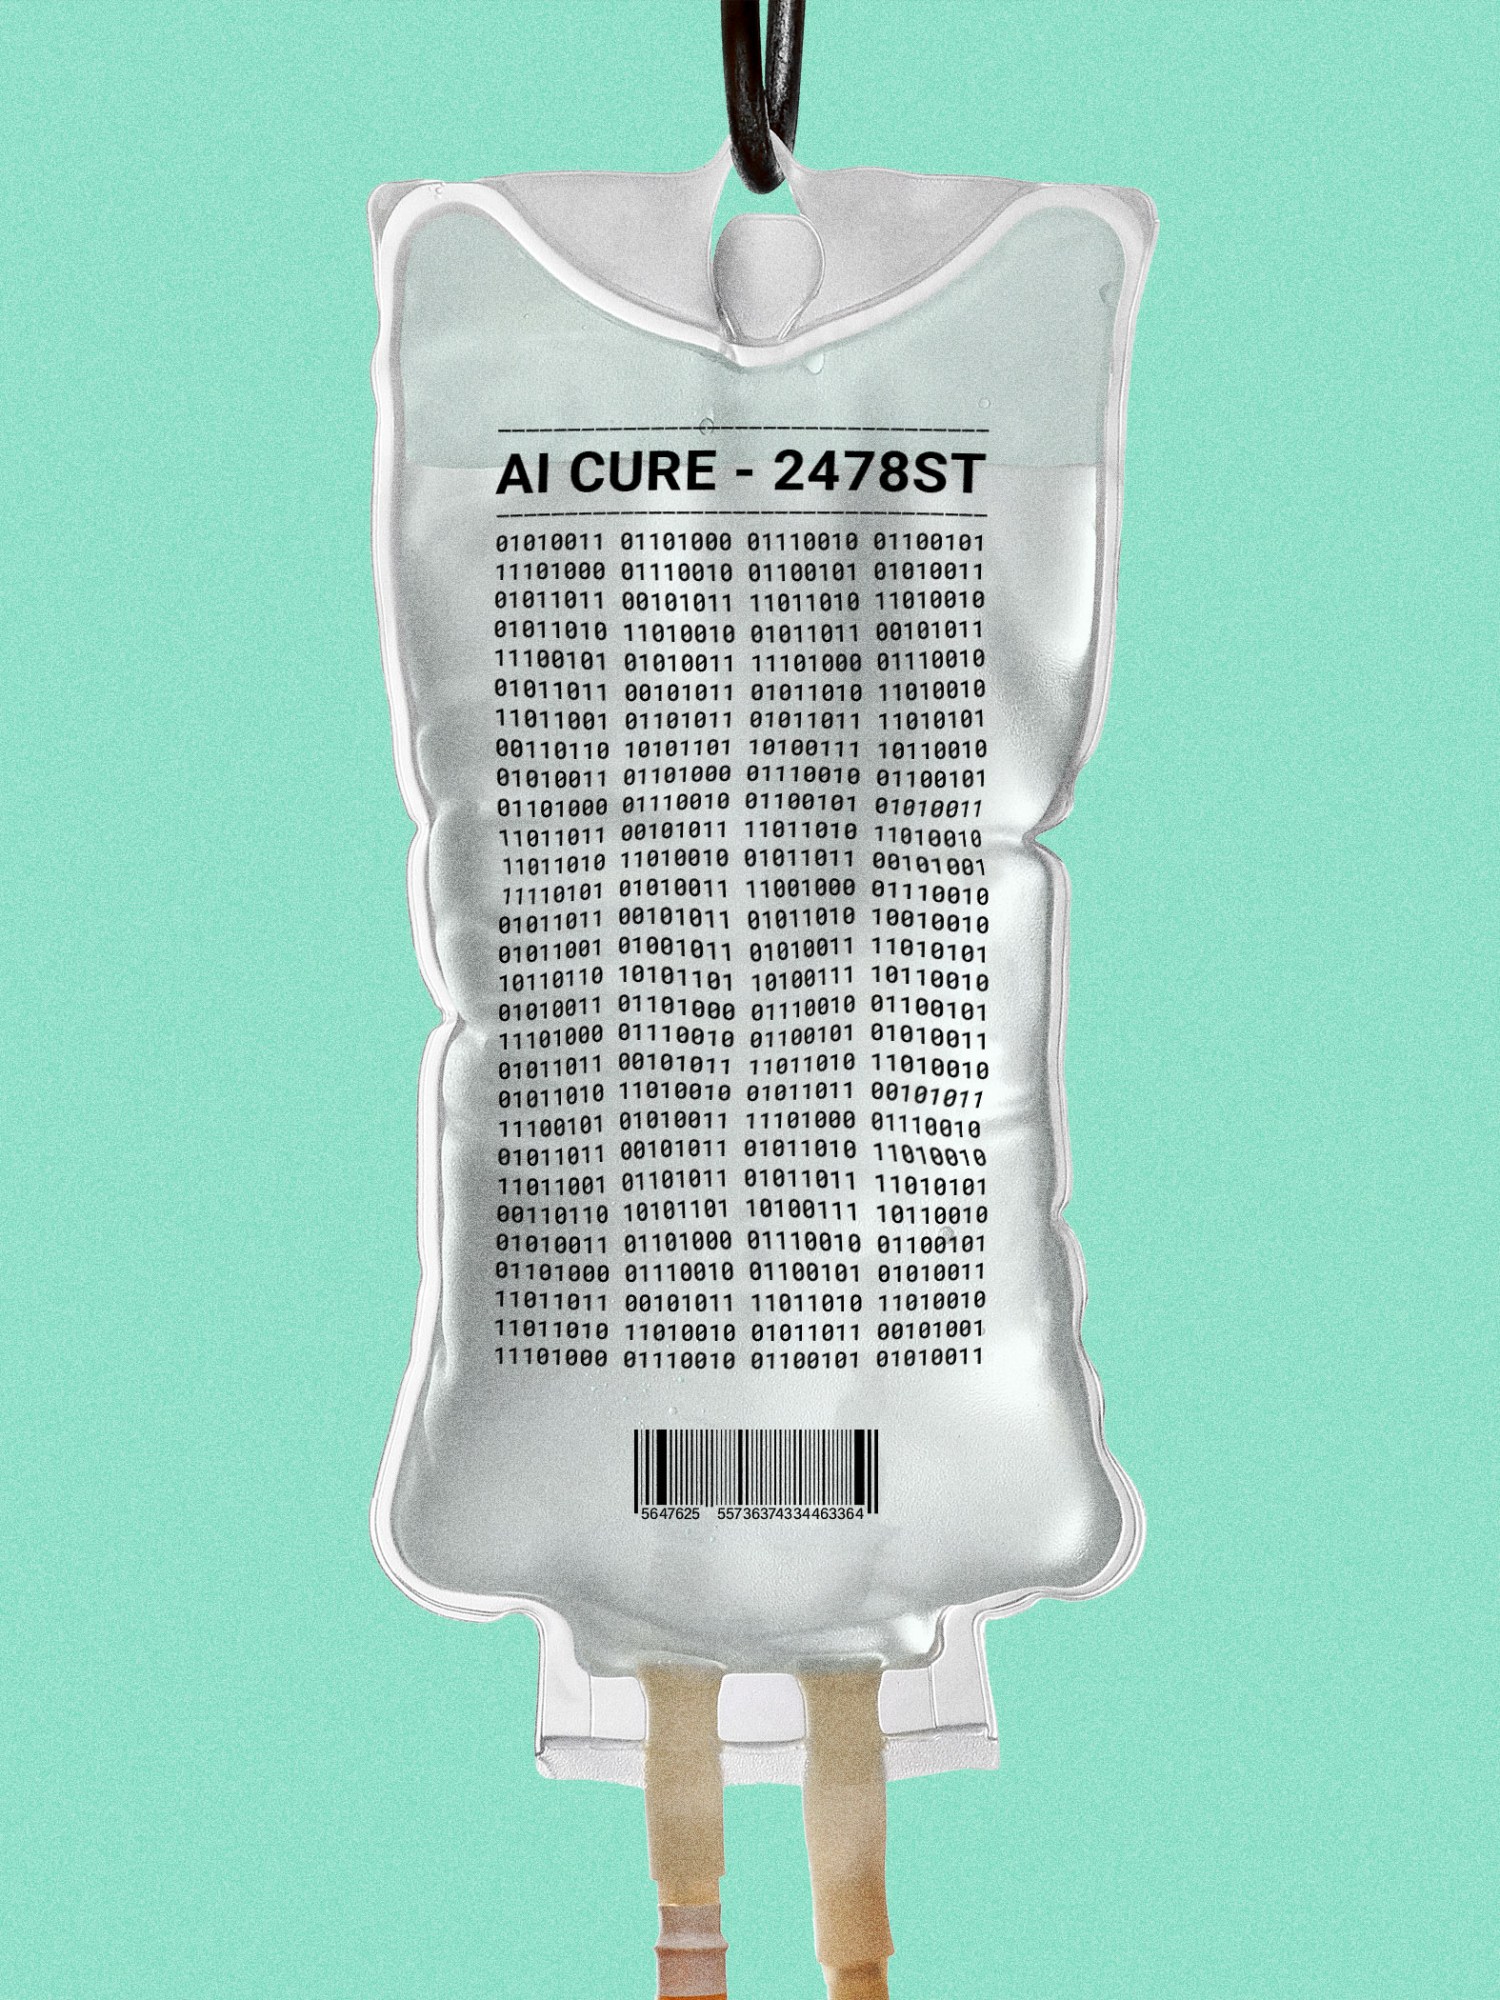 Saline bag with "AI Cure - 2478ST" and columns of binary code printed on the surface